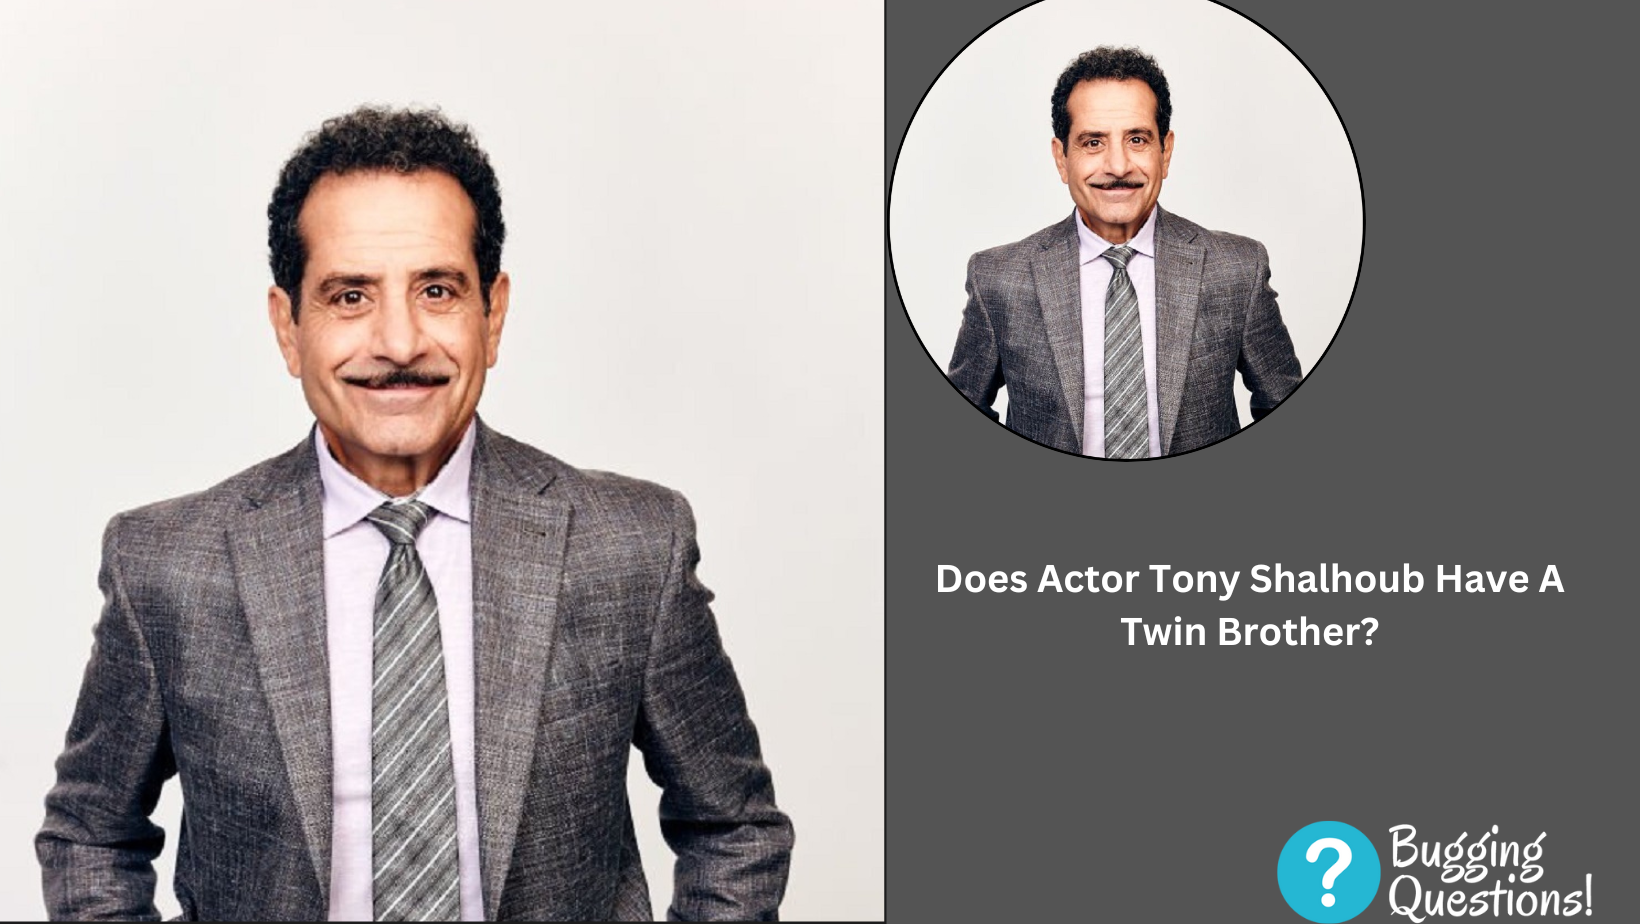 Does Actor Tony Shalhoub Have A Twin Brother?